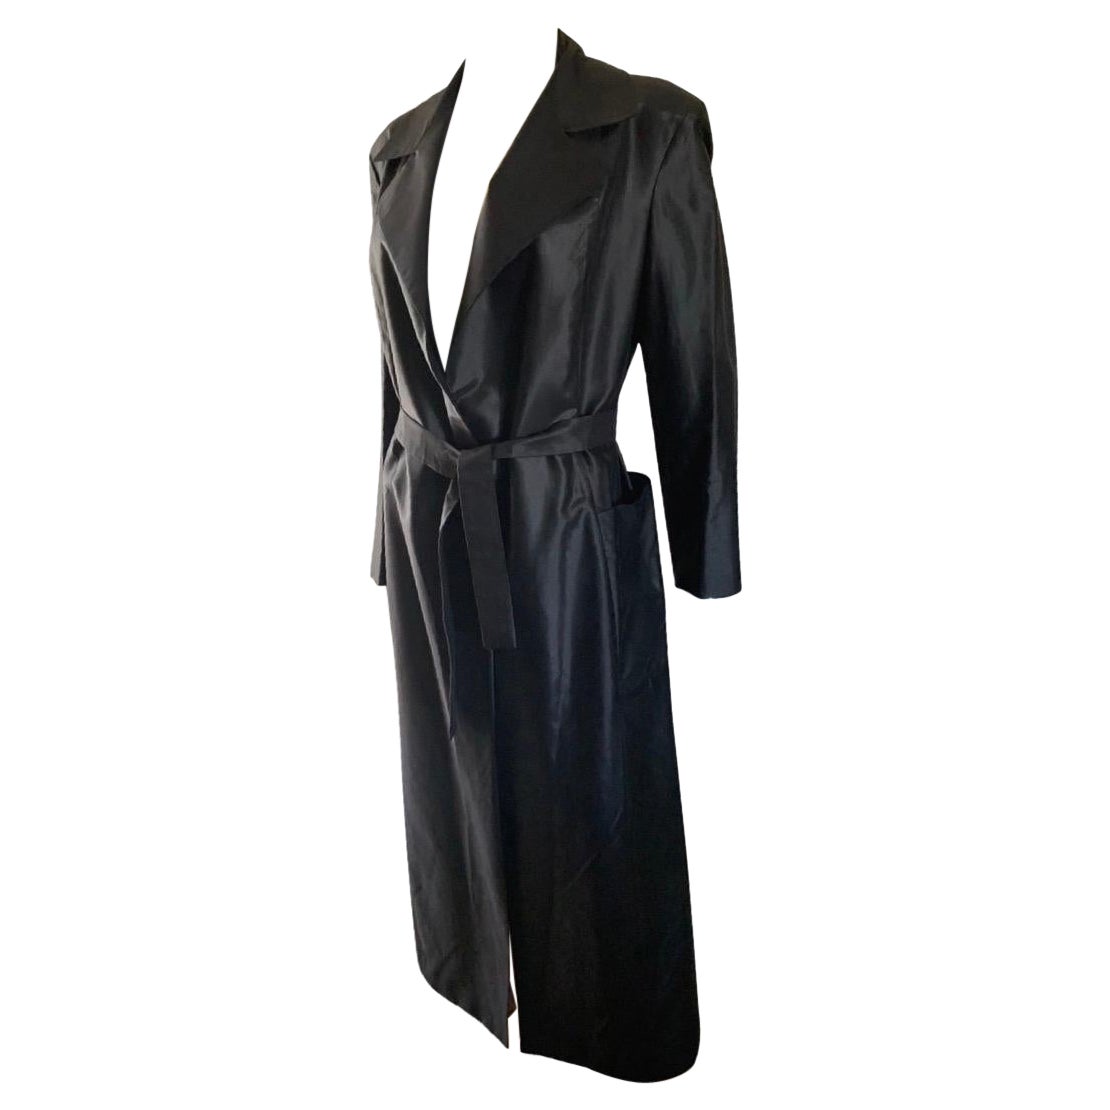 A very sexy Trench coat from Vintage Italian Designer Collection Extē. They were a very successful high-end Italian label. The jacket is impeccably made with French seams throughout the interior. Large patch pockets on the exterior with removable